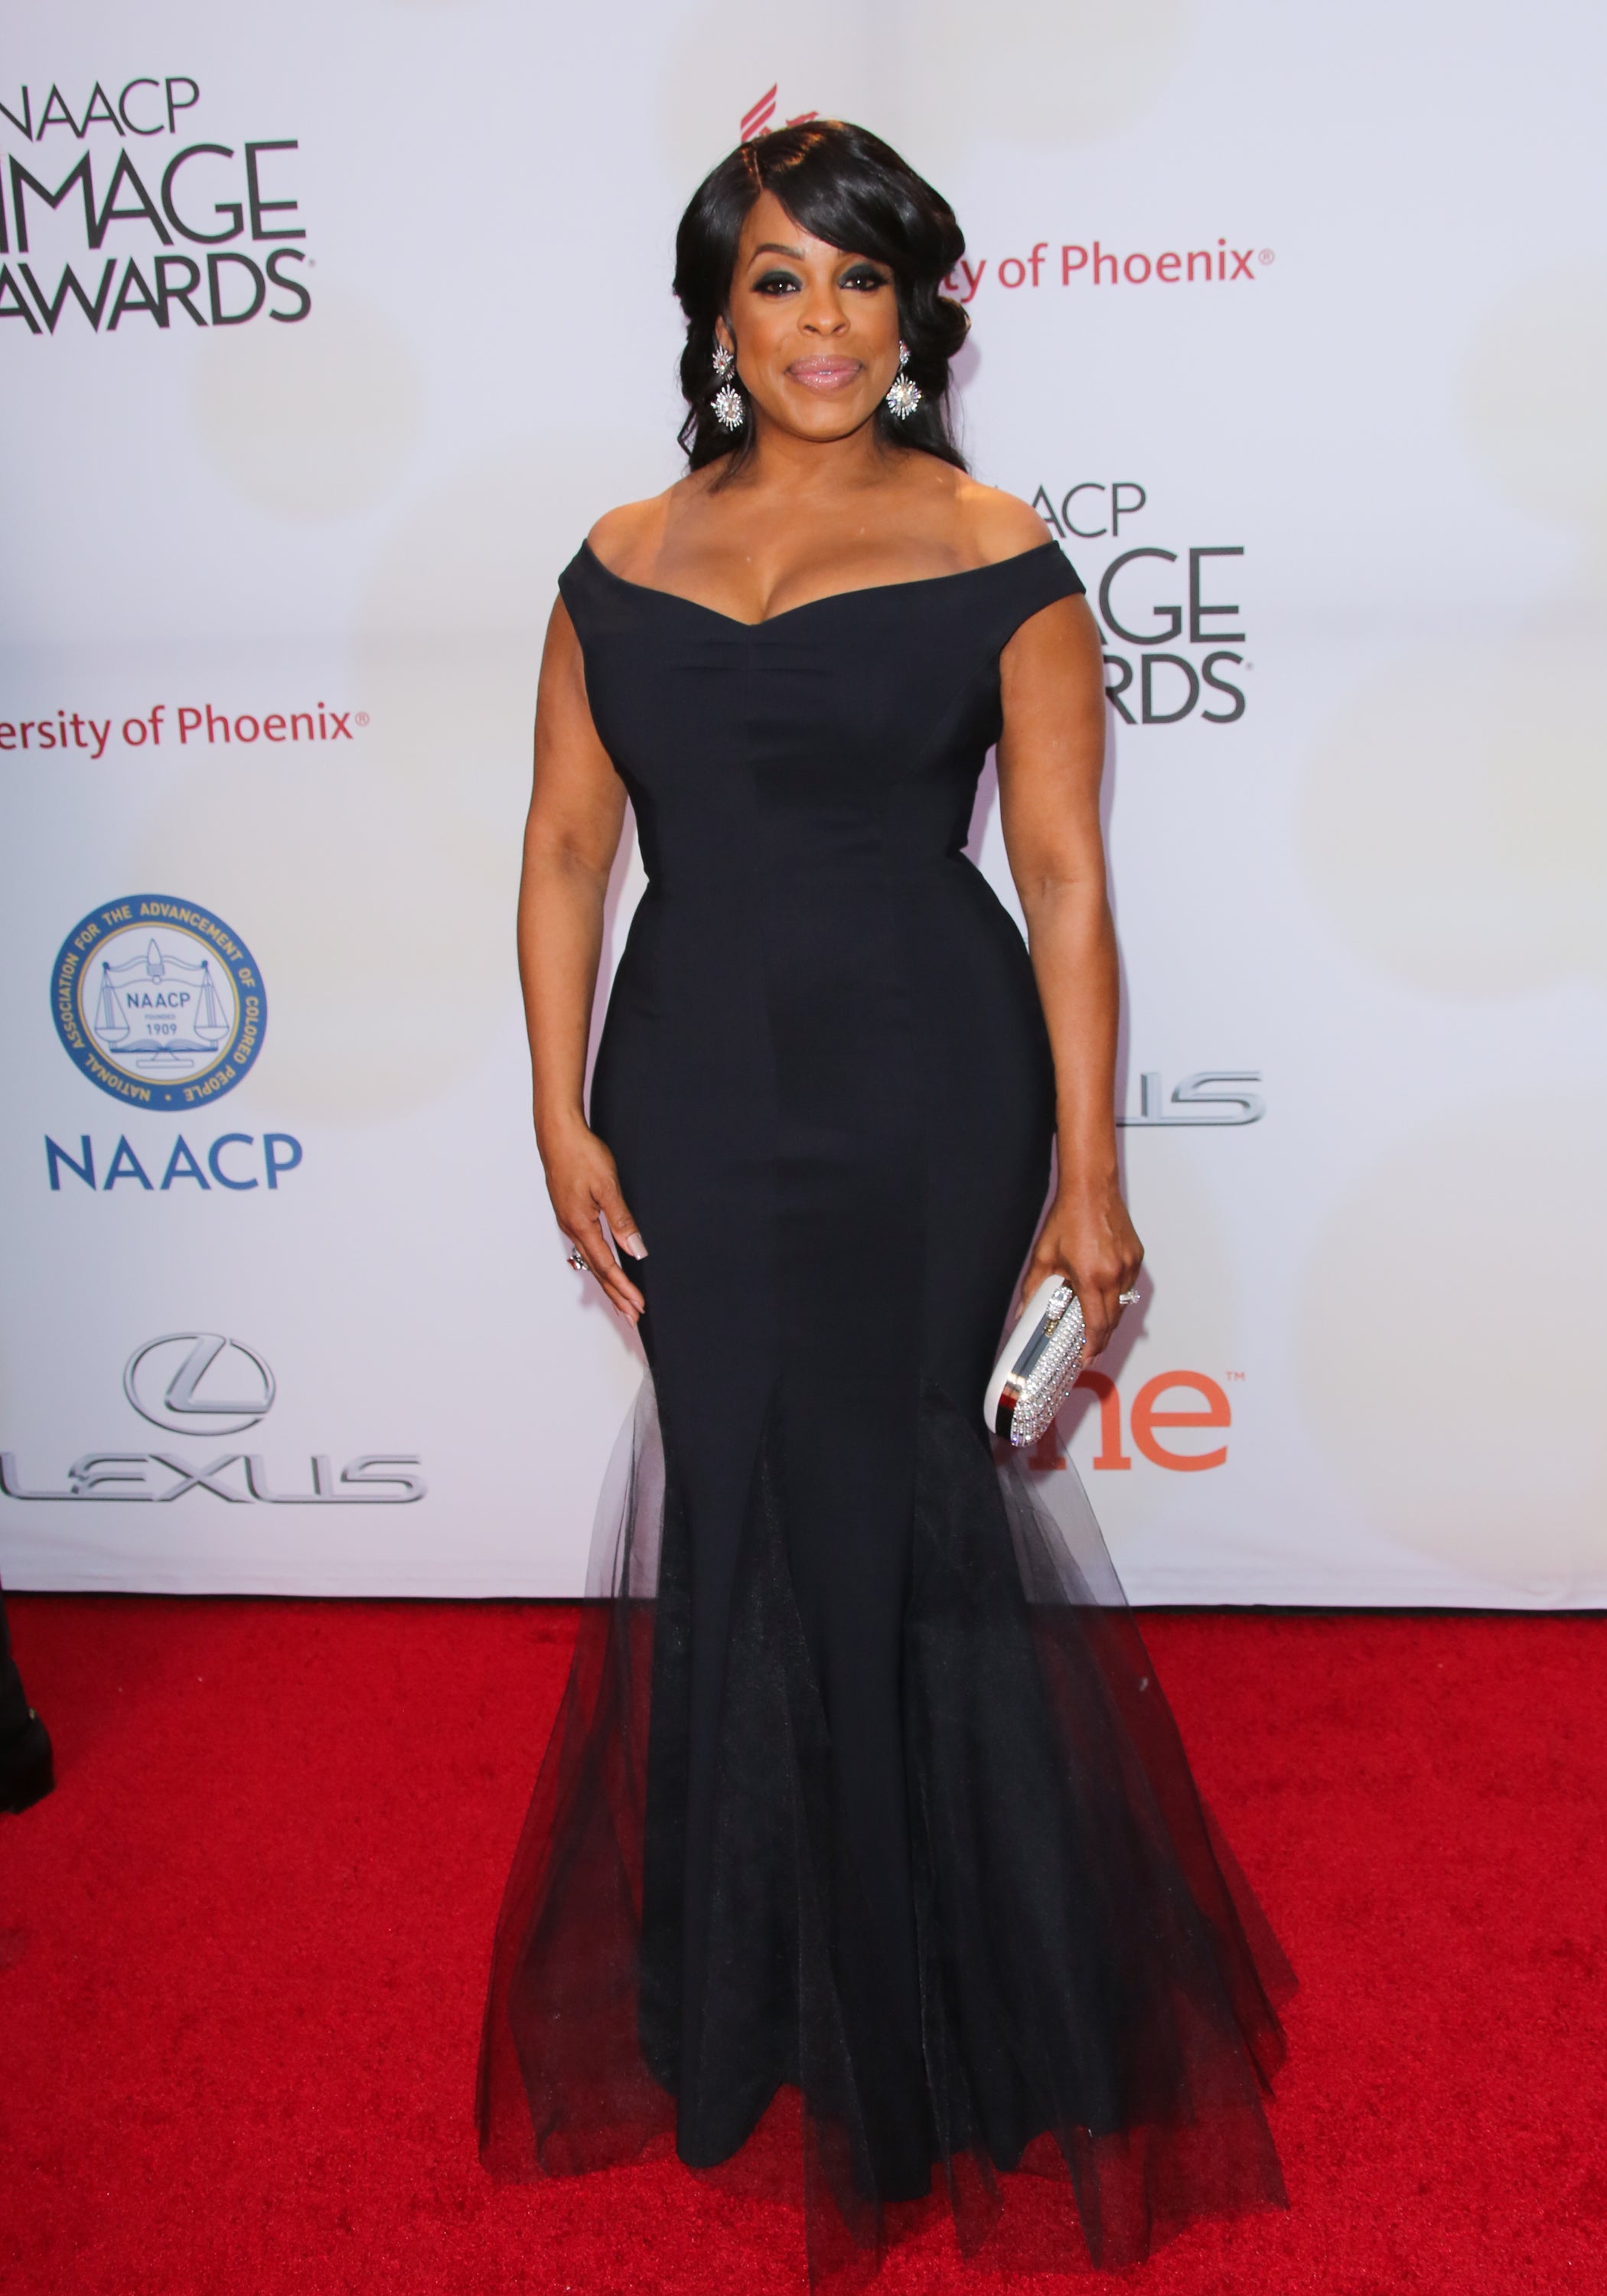 Niecy Nash is a Style Star and We’ve Got the Receipts to Prove It